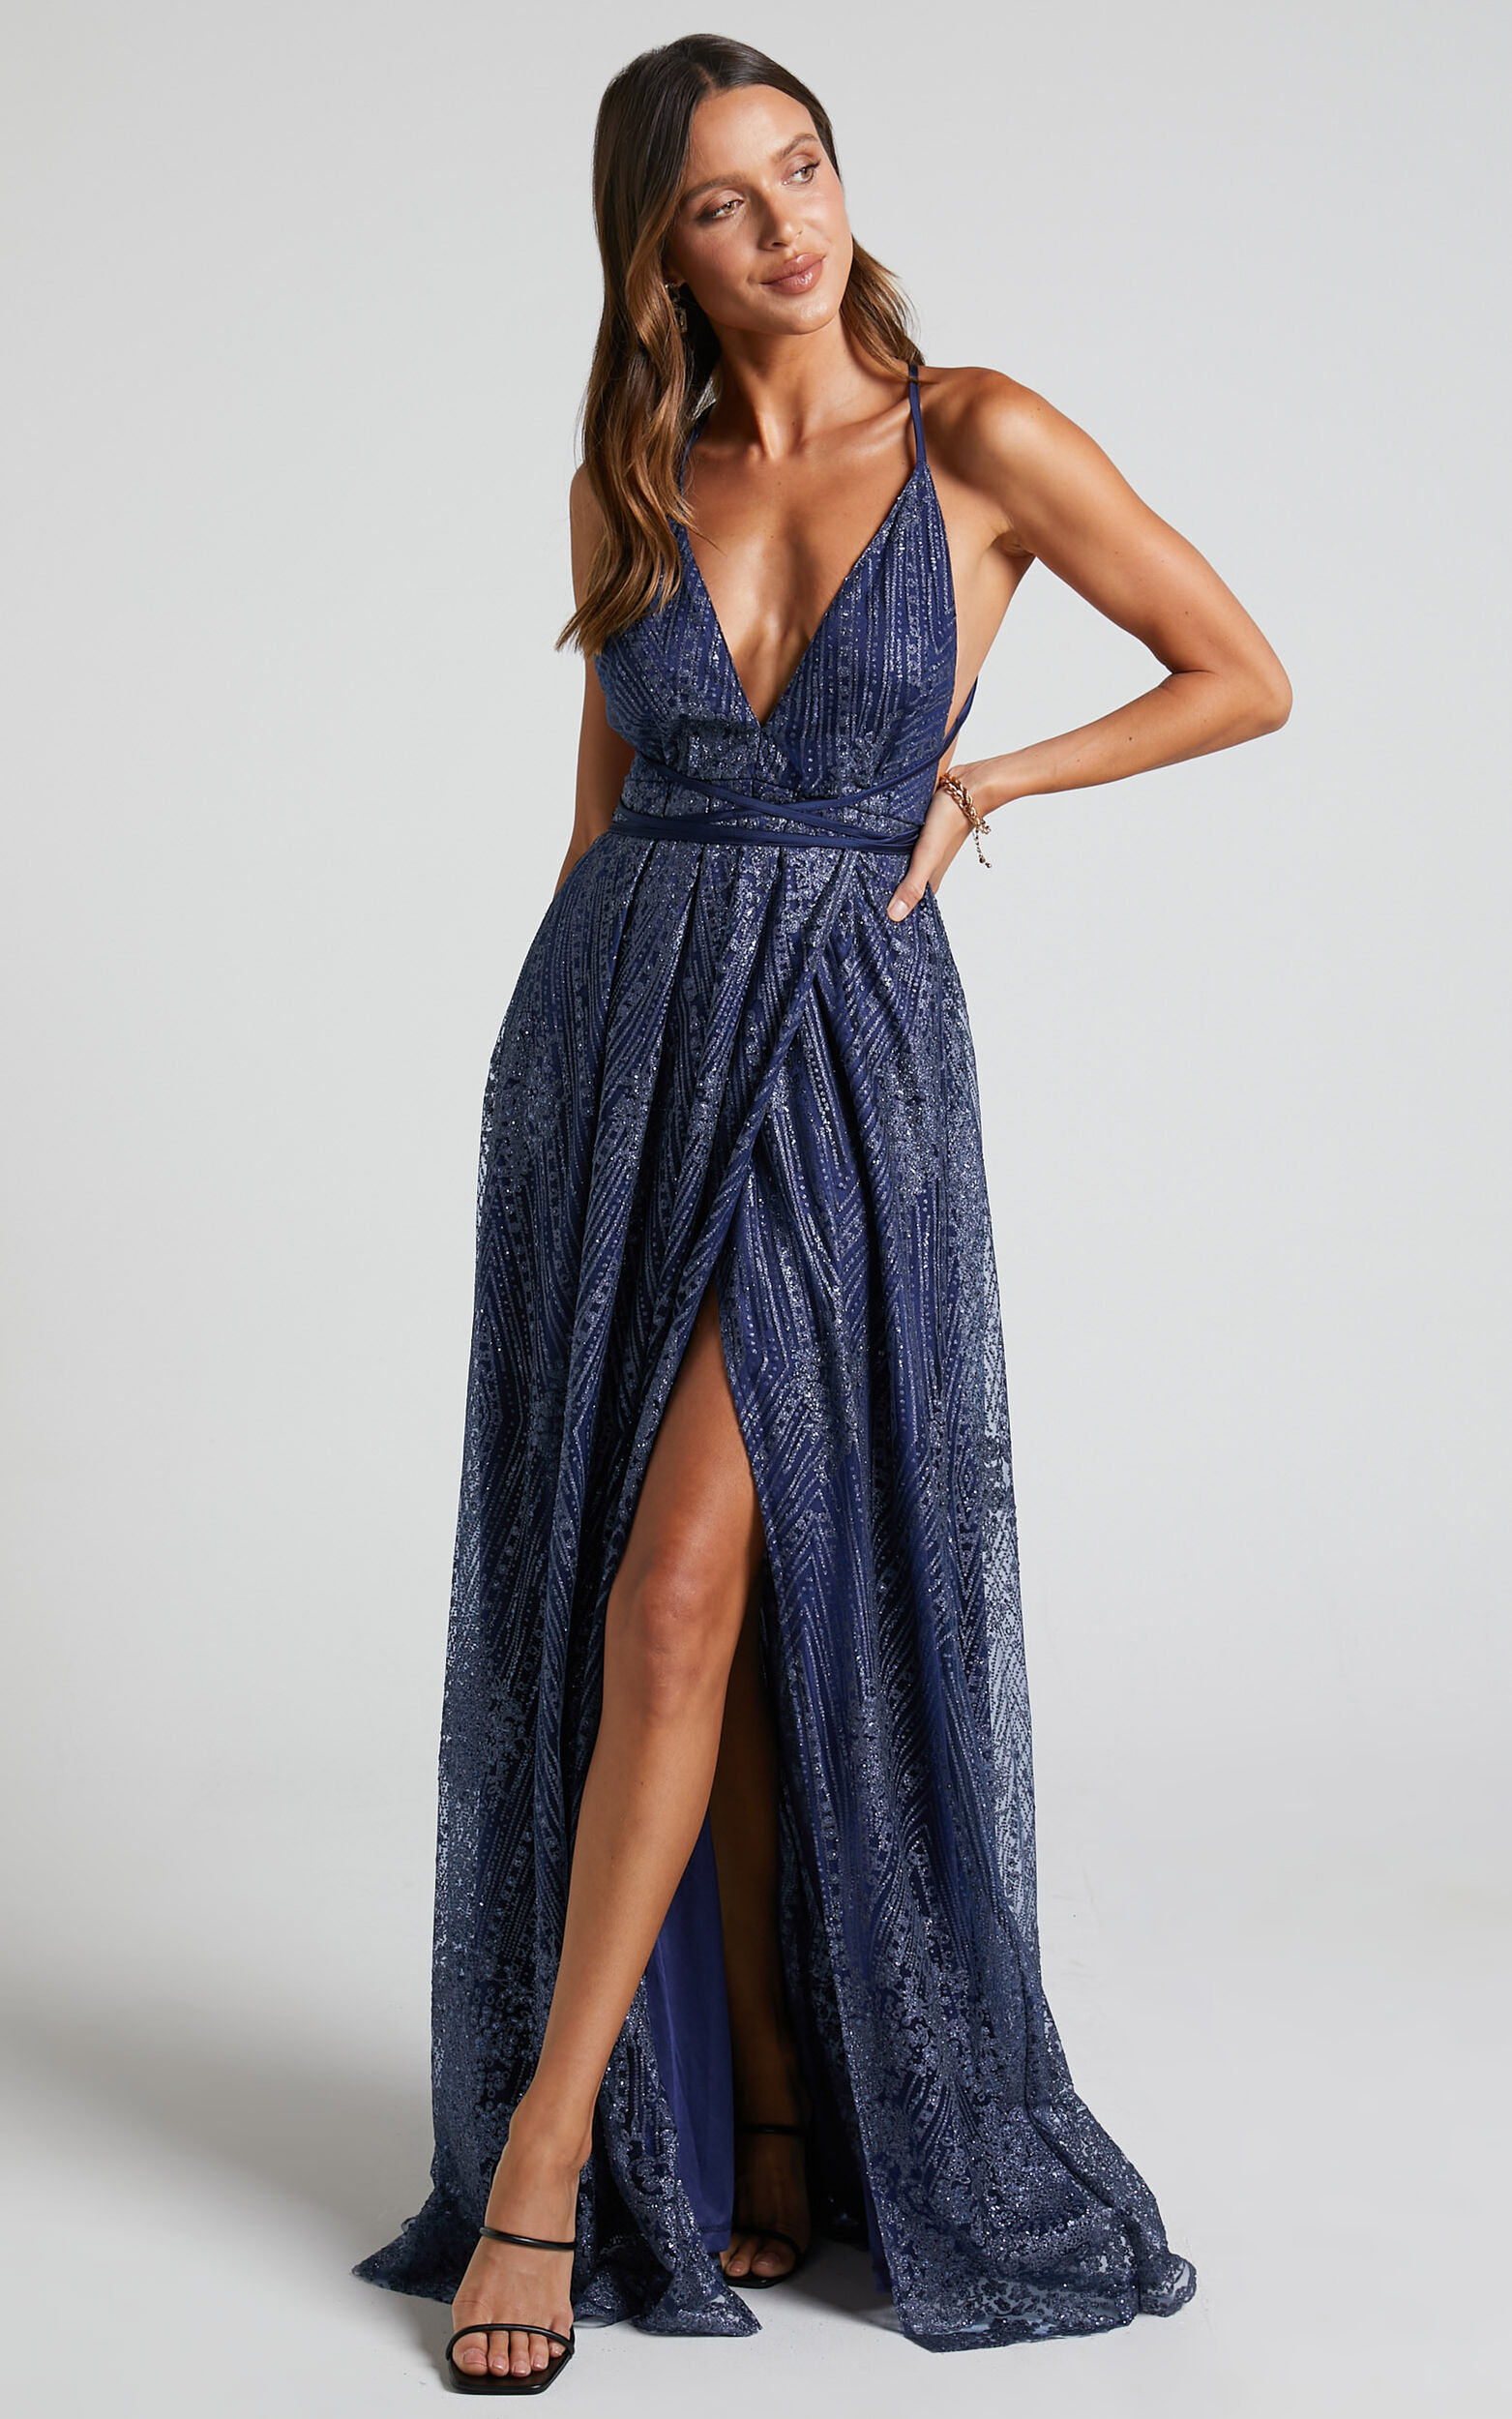 NEW YORK NIGHTS MAXI DRESS - SEQUIN PLUNGE CROSS BACK DRESS in Navy - 04, NVY1